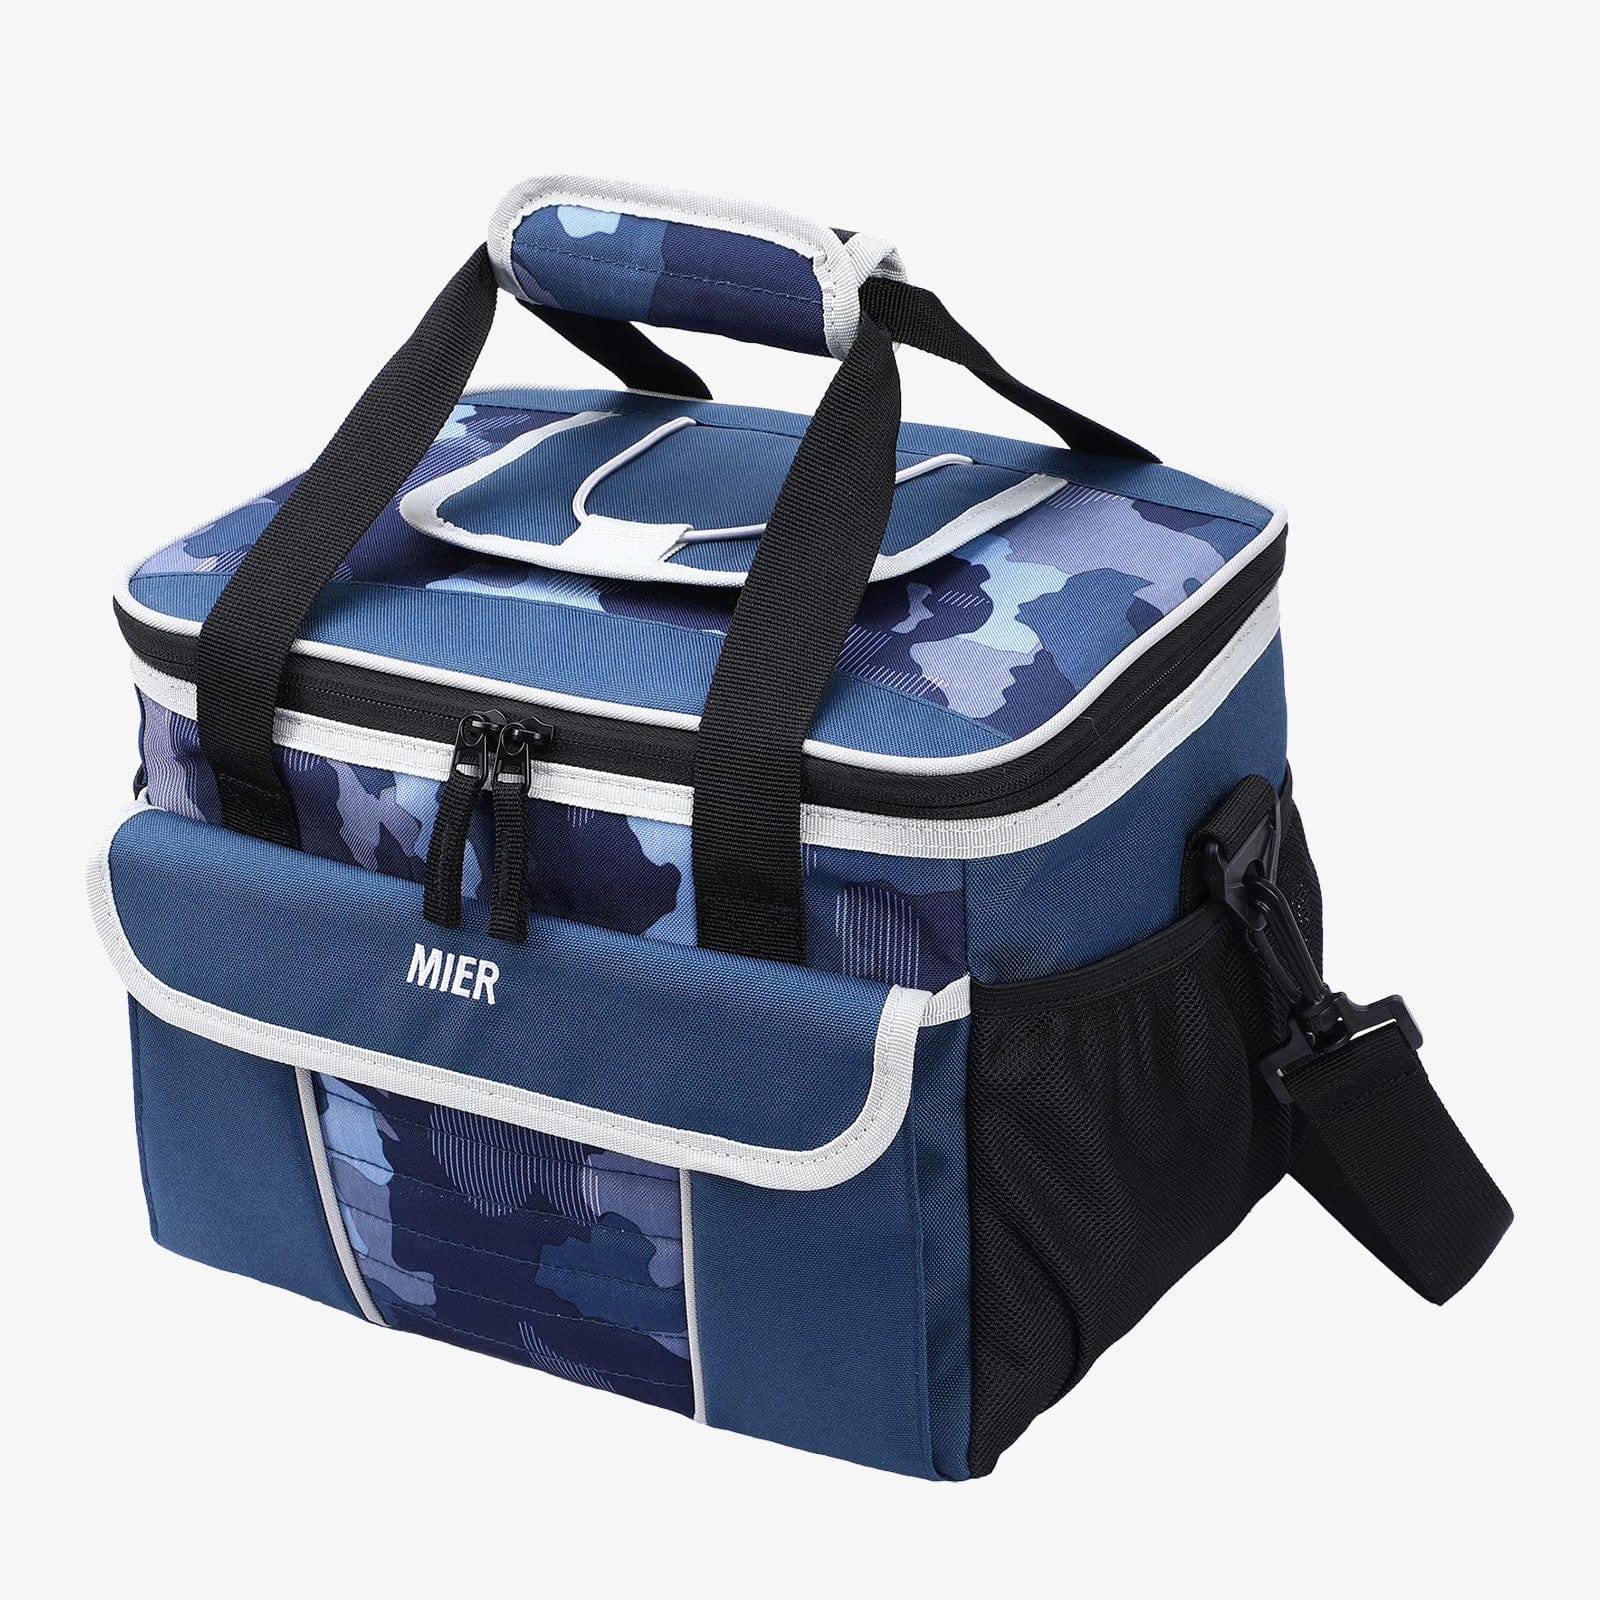 Large Soft Lunchbox Cooler Bag Insulated Lunch Bags for Adults Adult Lunch Bag Blue Camo / 18 Can MIER